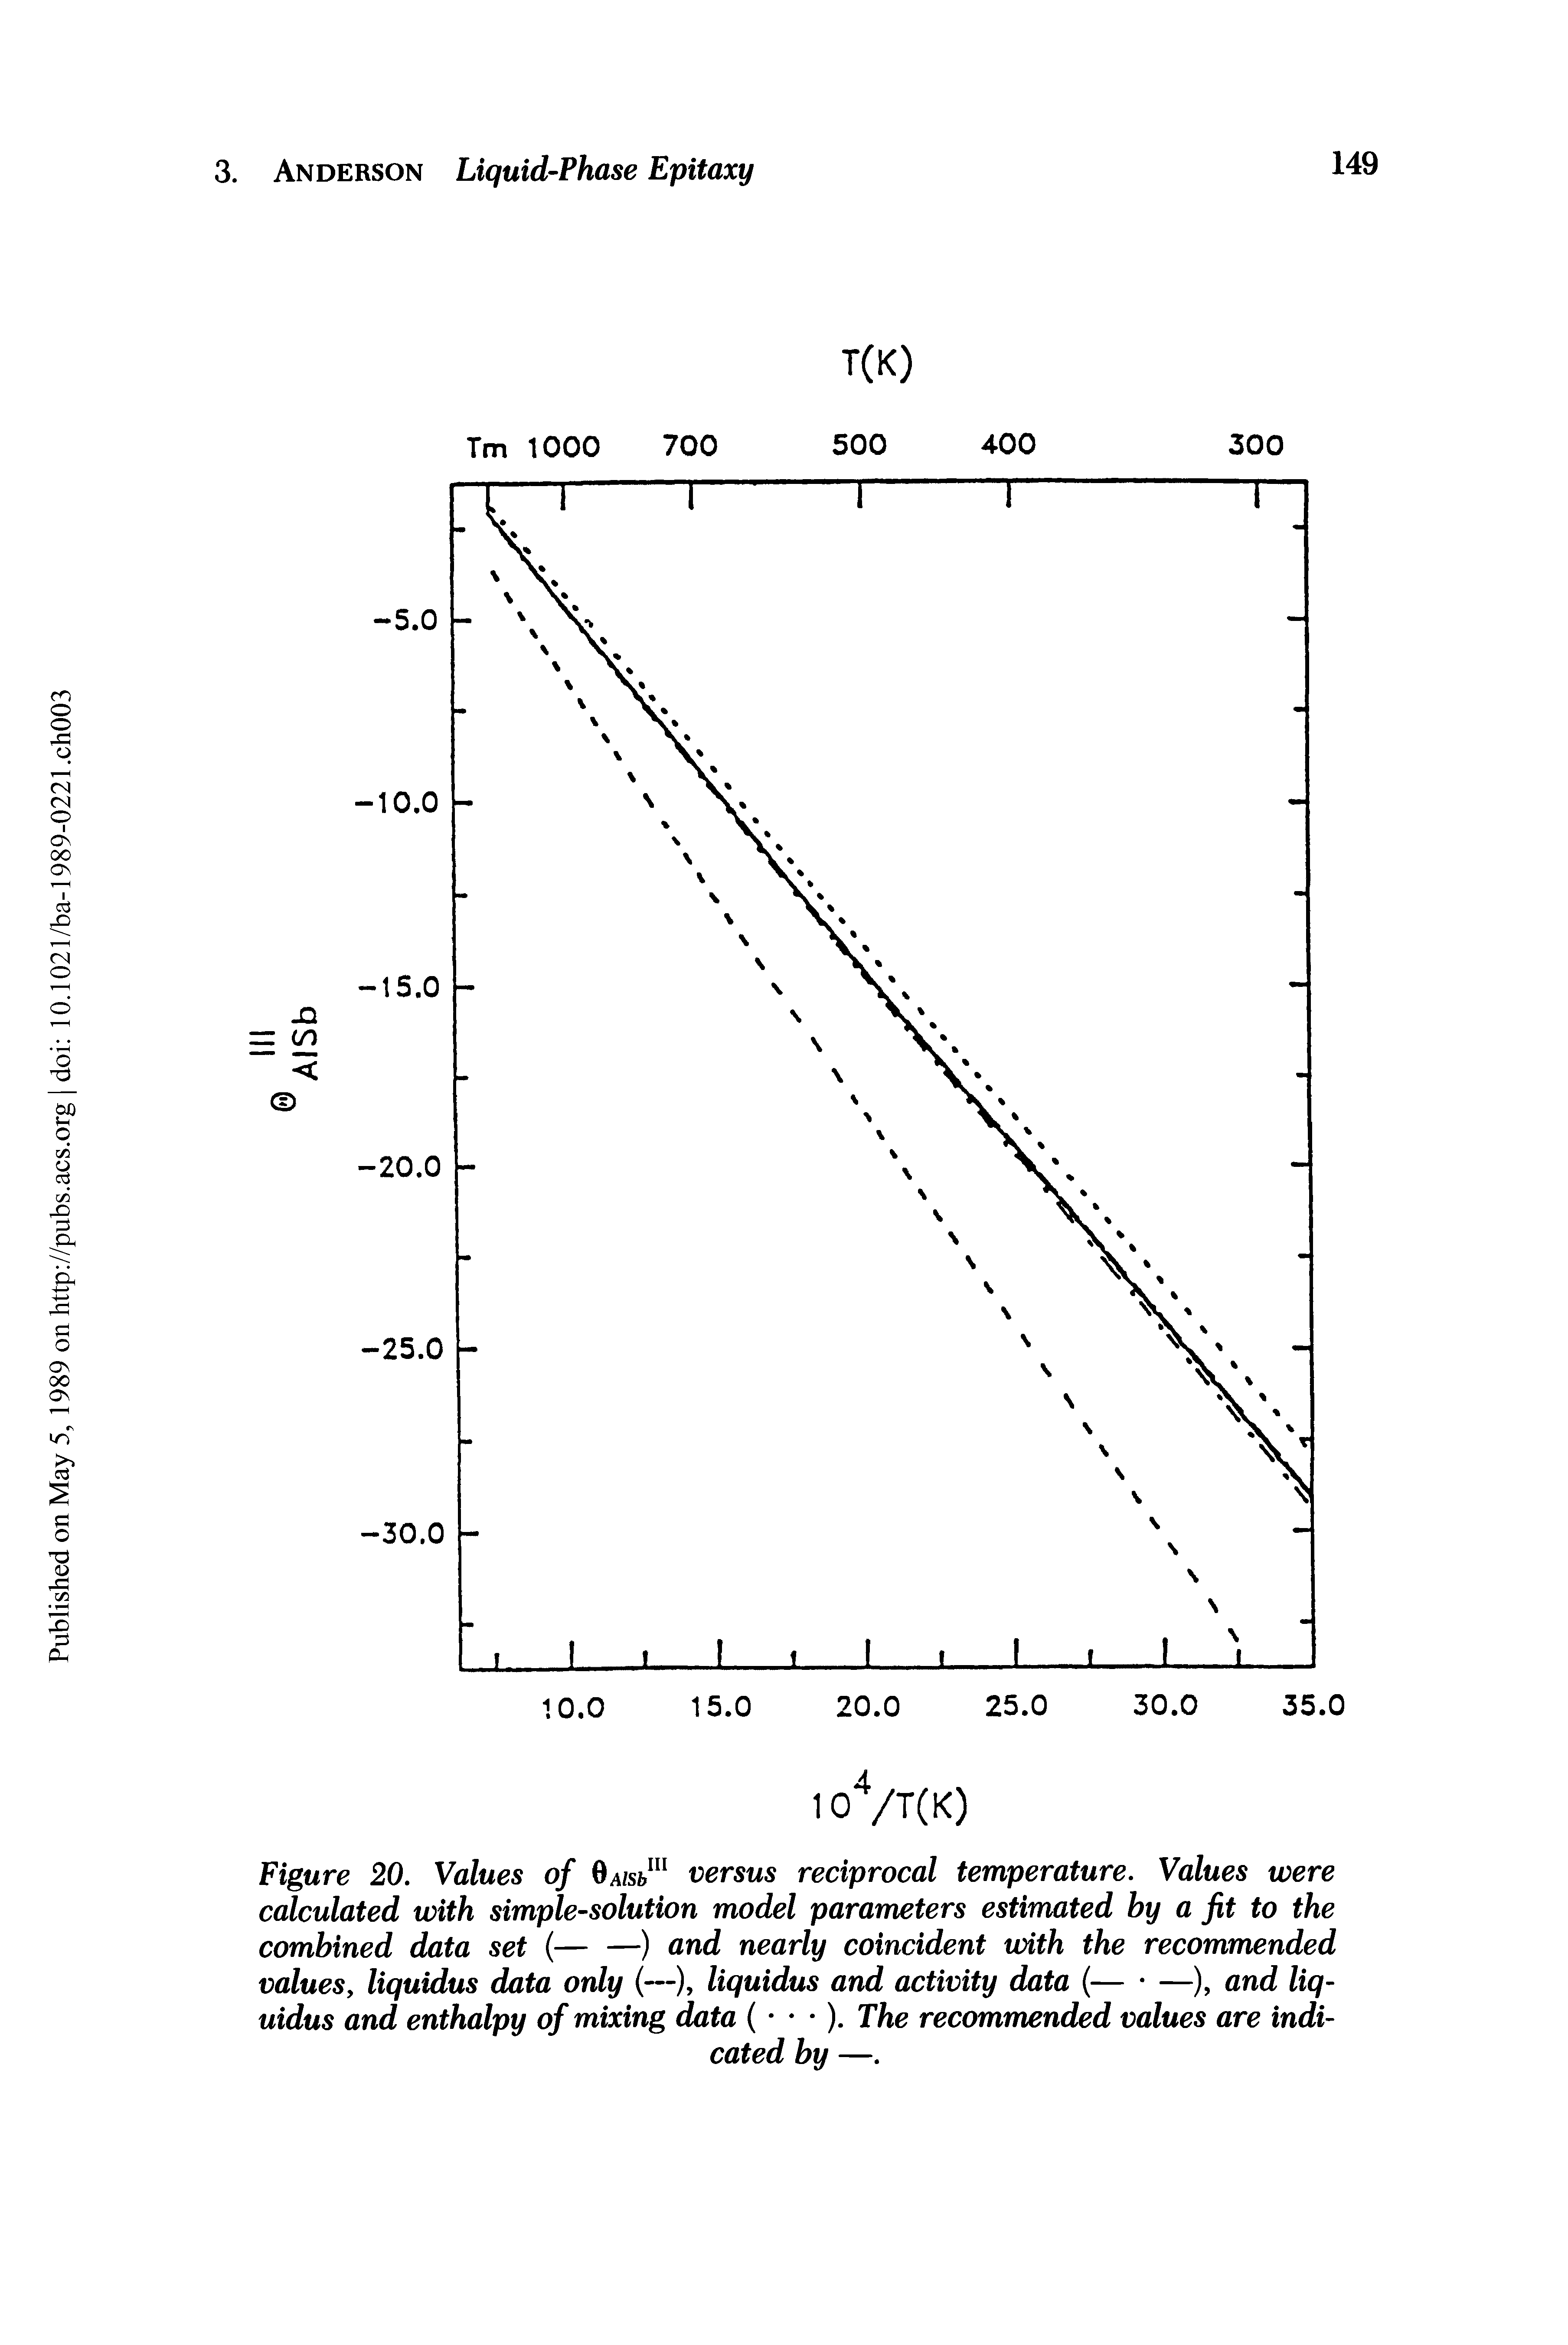 Figure 20. Values of GW11 versus reciprocal temperature. Values were calculated with simple-solution model parameters estimated by a Jit to the combined data set (— —) and nearly coincident with the recommended values, liquidus data only (—), liquidus and activity data (— —), and liq-uidus and enthalpy of mixing data ( ) The recommended values are indicated by —.